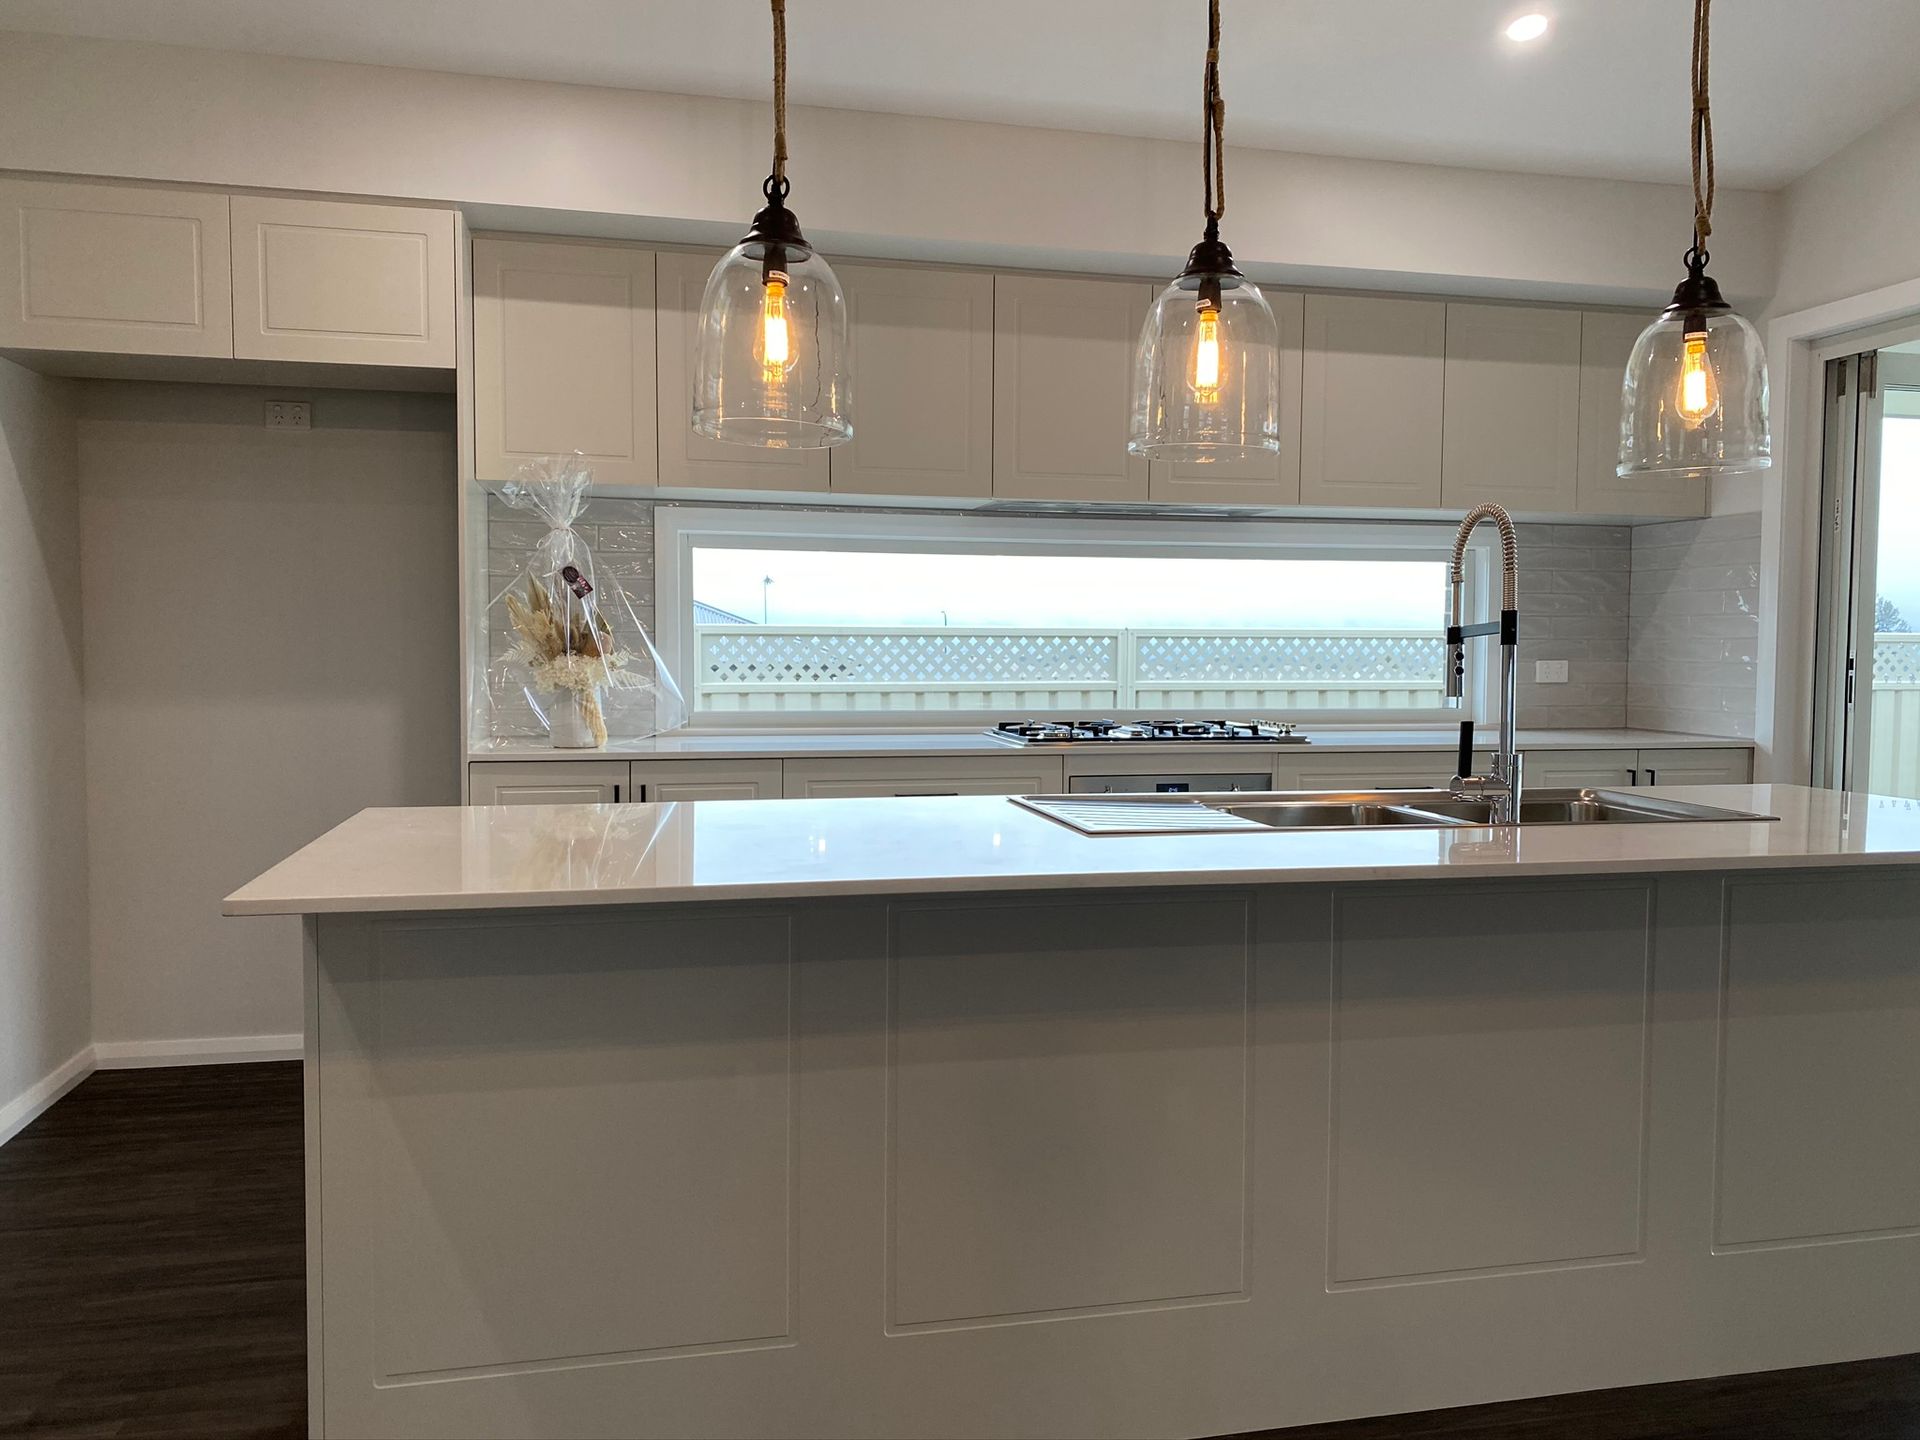 Luxurious and Bright Kitchen Interior — Kitchen Renovations in Dubbo, QLD